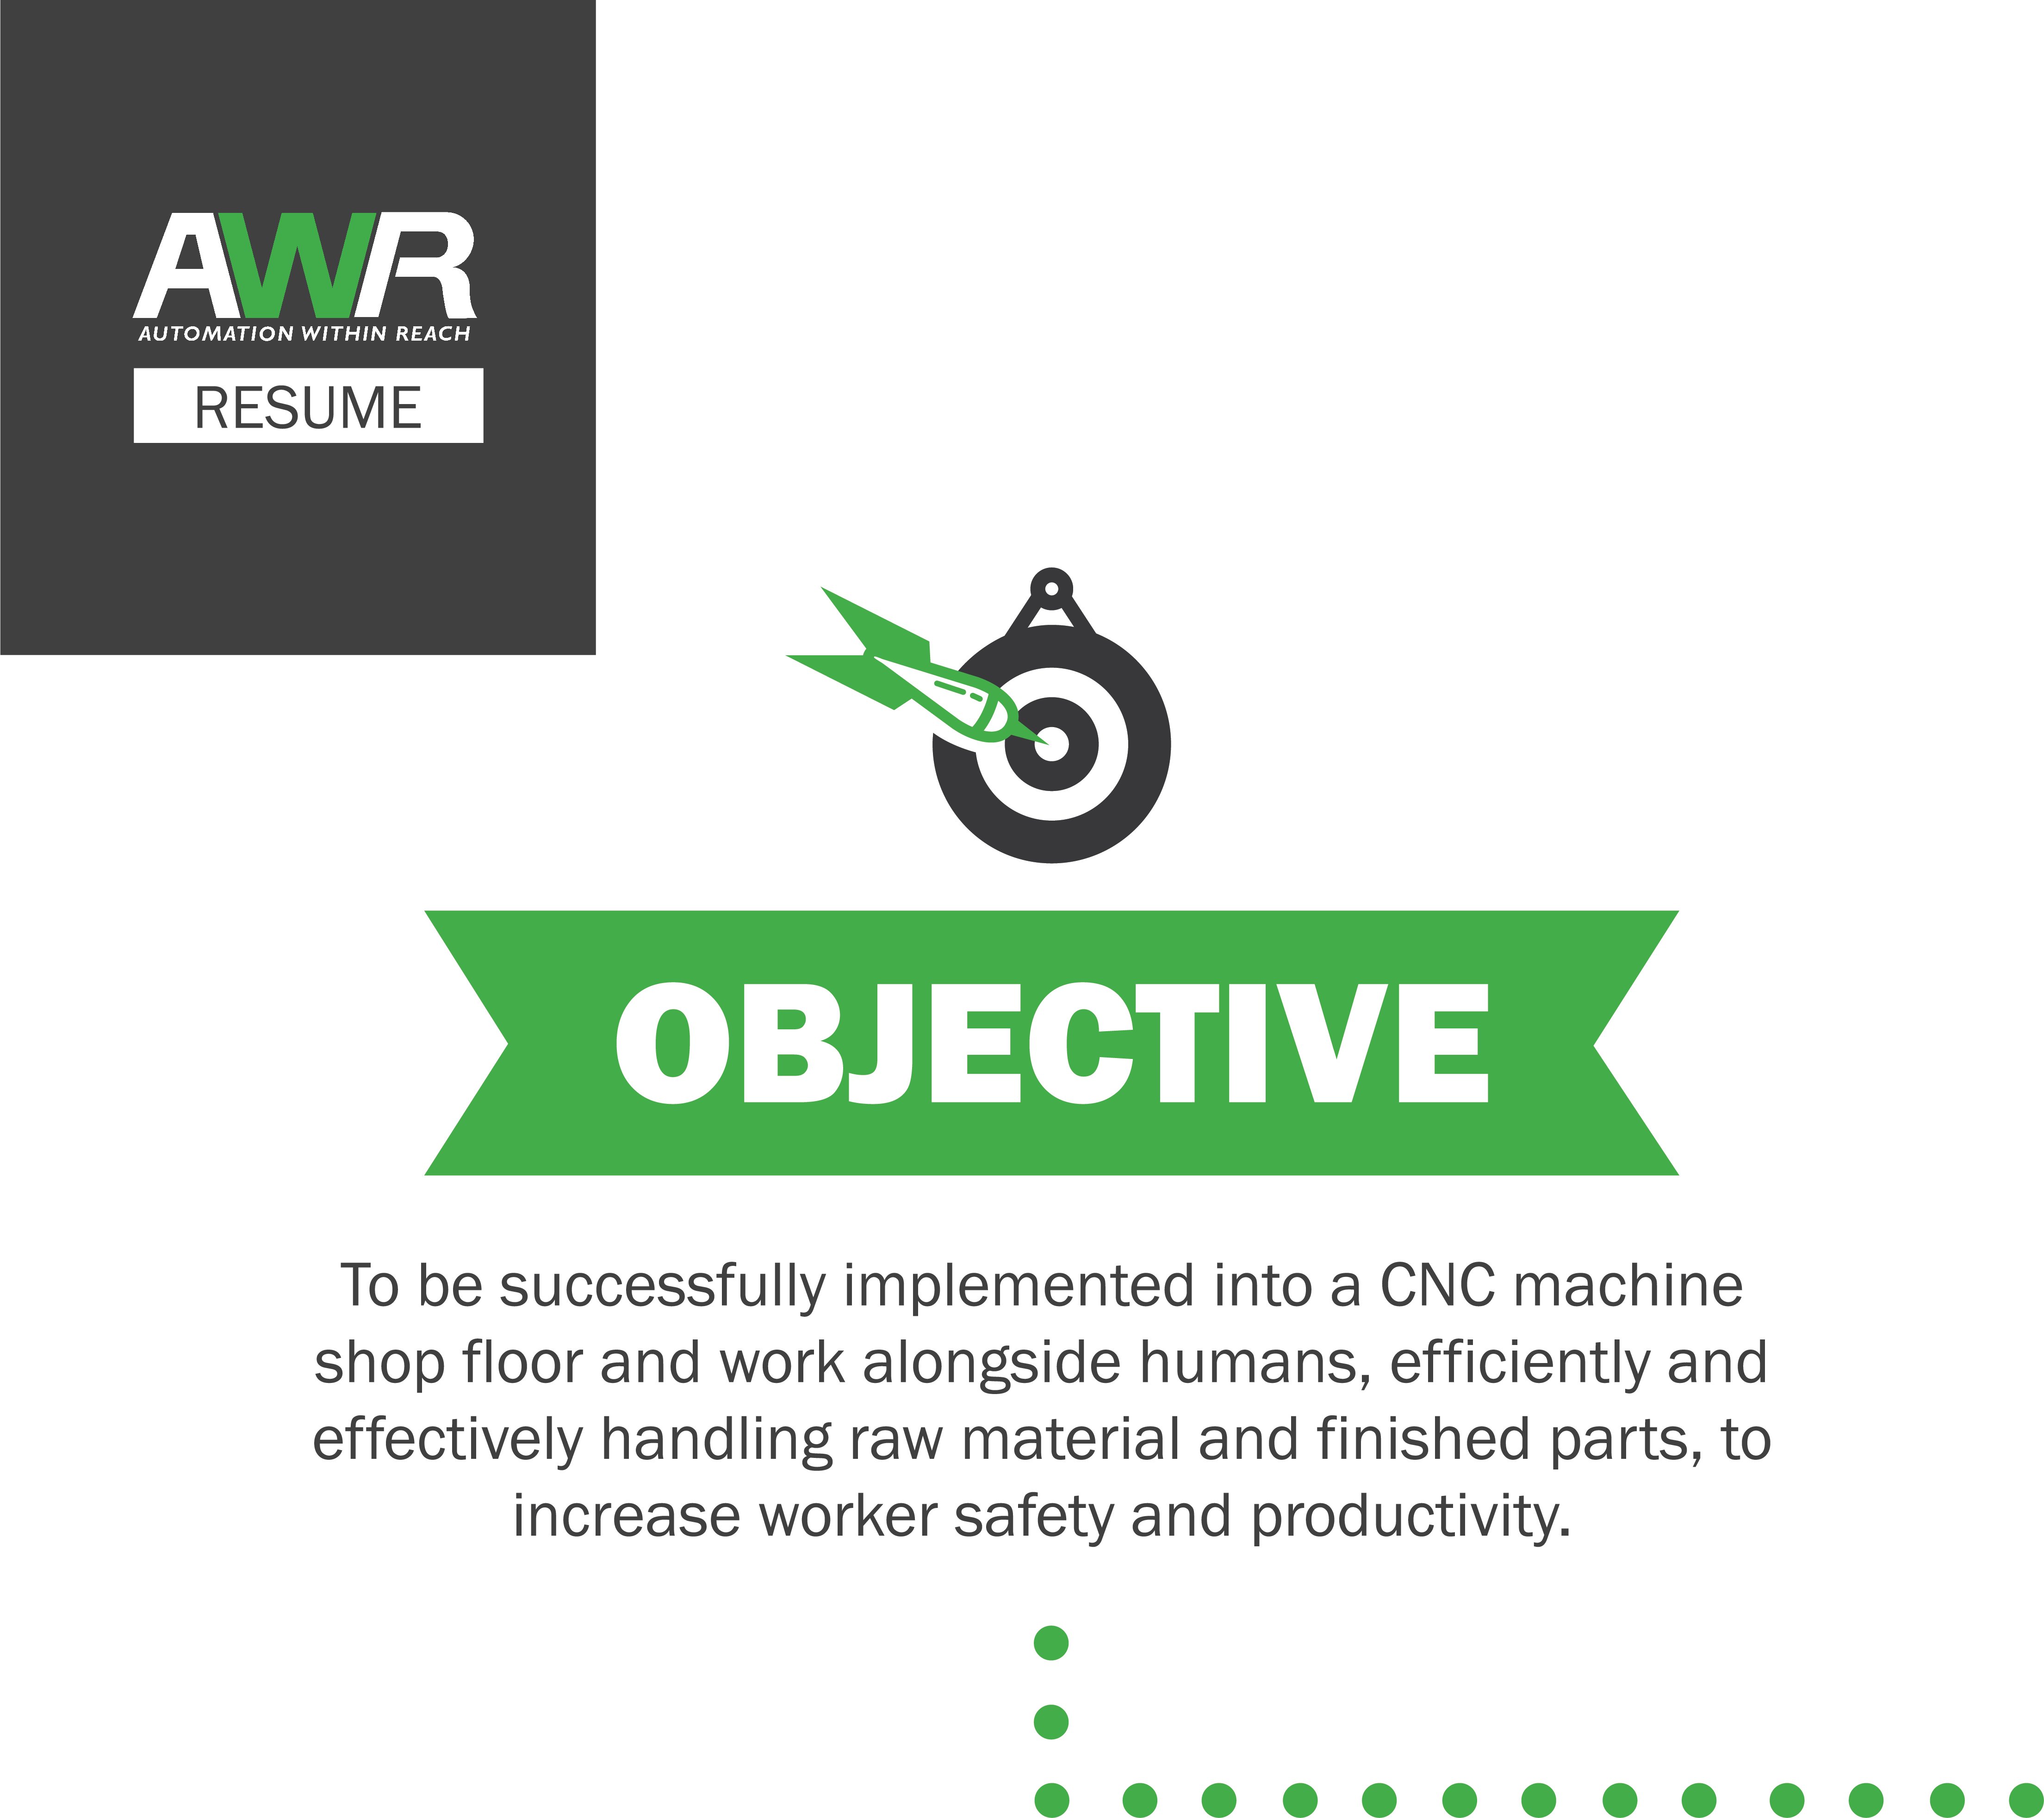 Resume of a Robotic Machine Operator: An Infographic